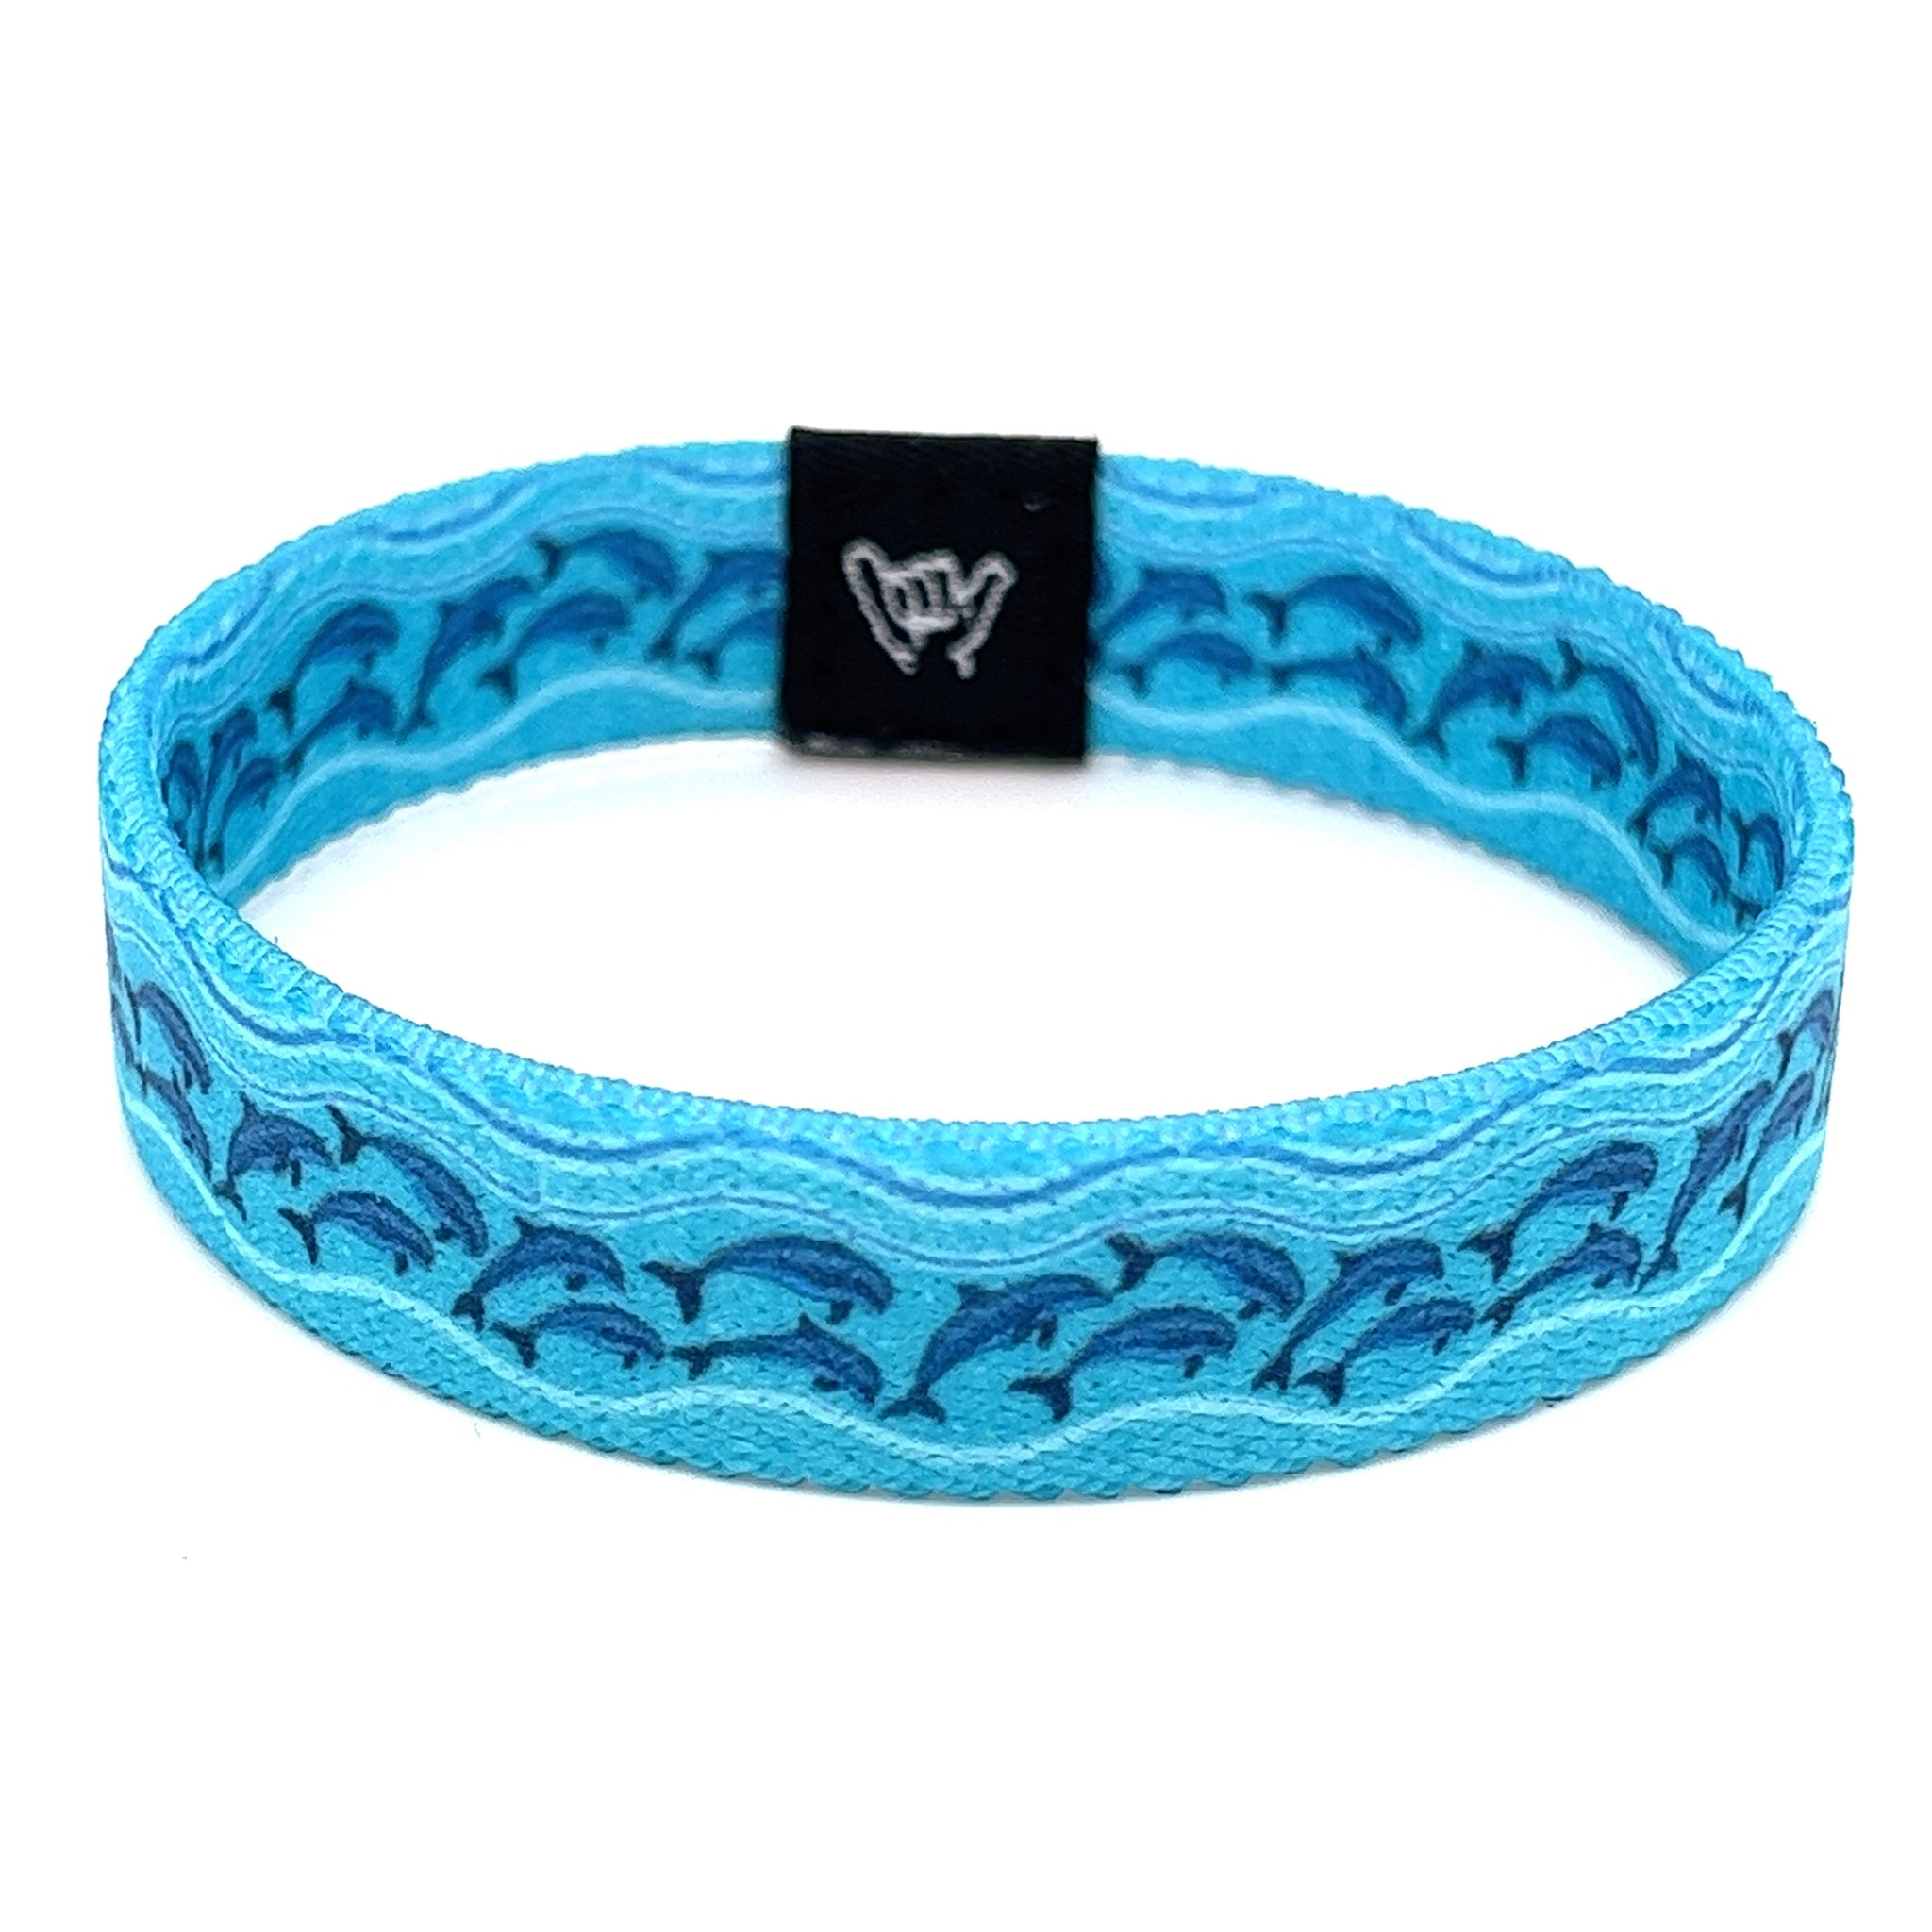 Dolphins of Hang – Bands Wristband Loose School Bracelet